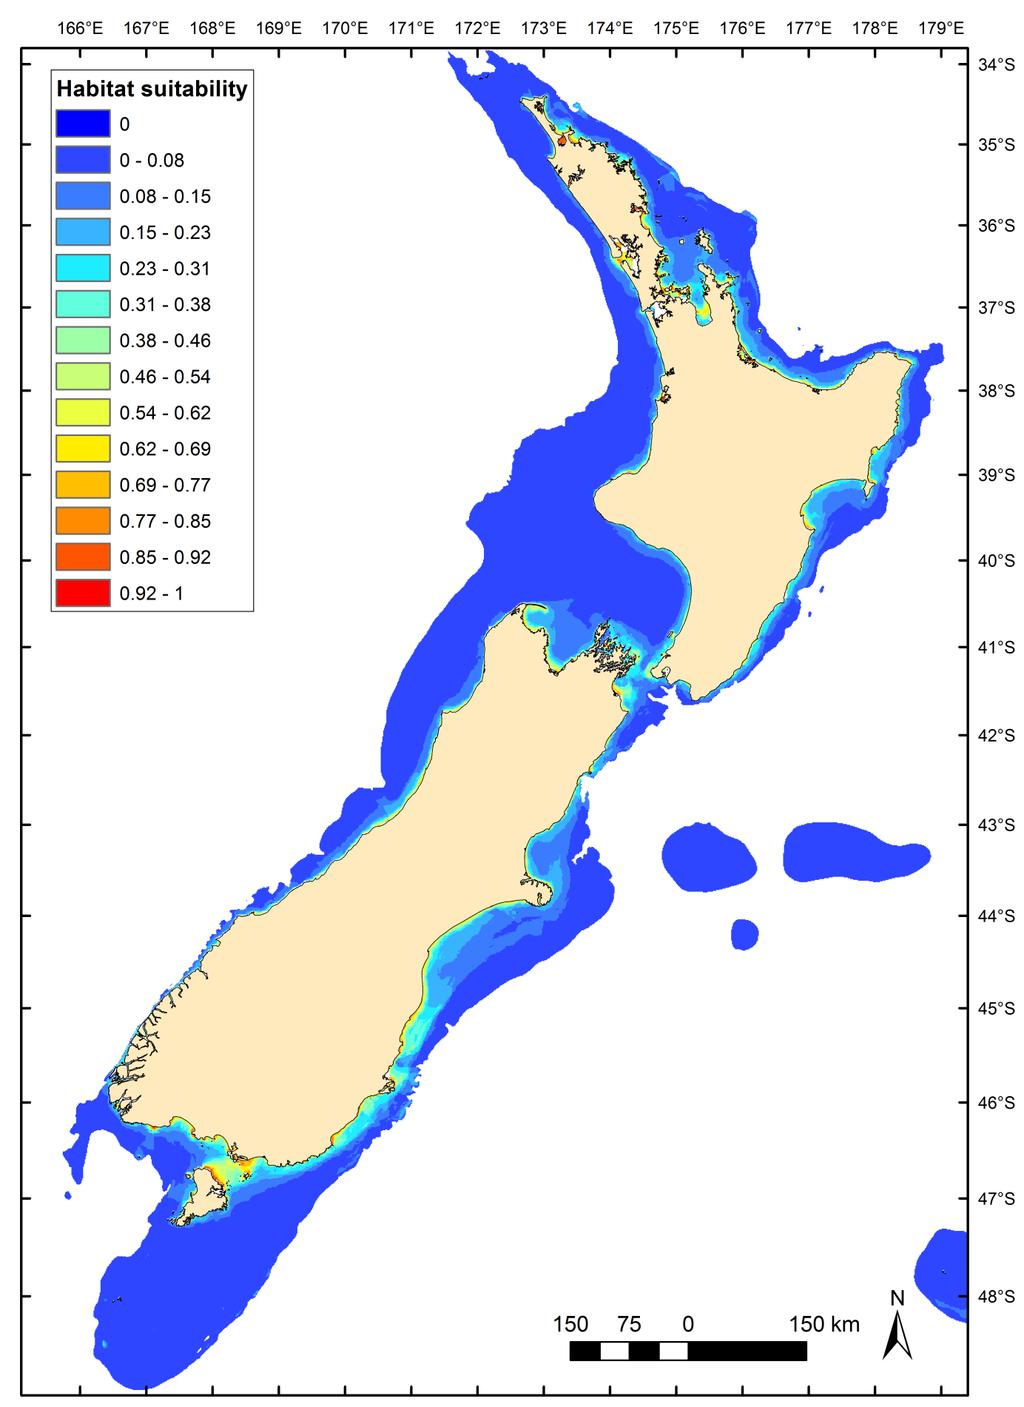 Figure 3-3: Winter habitat suitability predictions for southern right whales derived from the habitat use model. Full extent of model within the 350 m isobaths of mainland New Zealand.